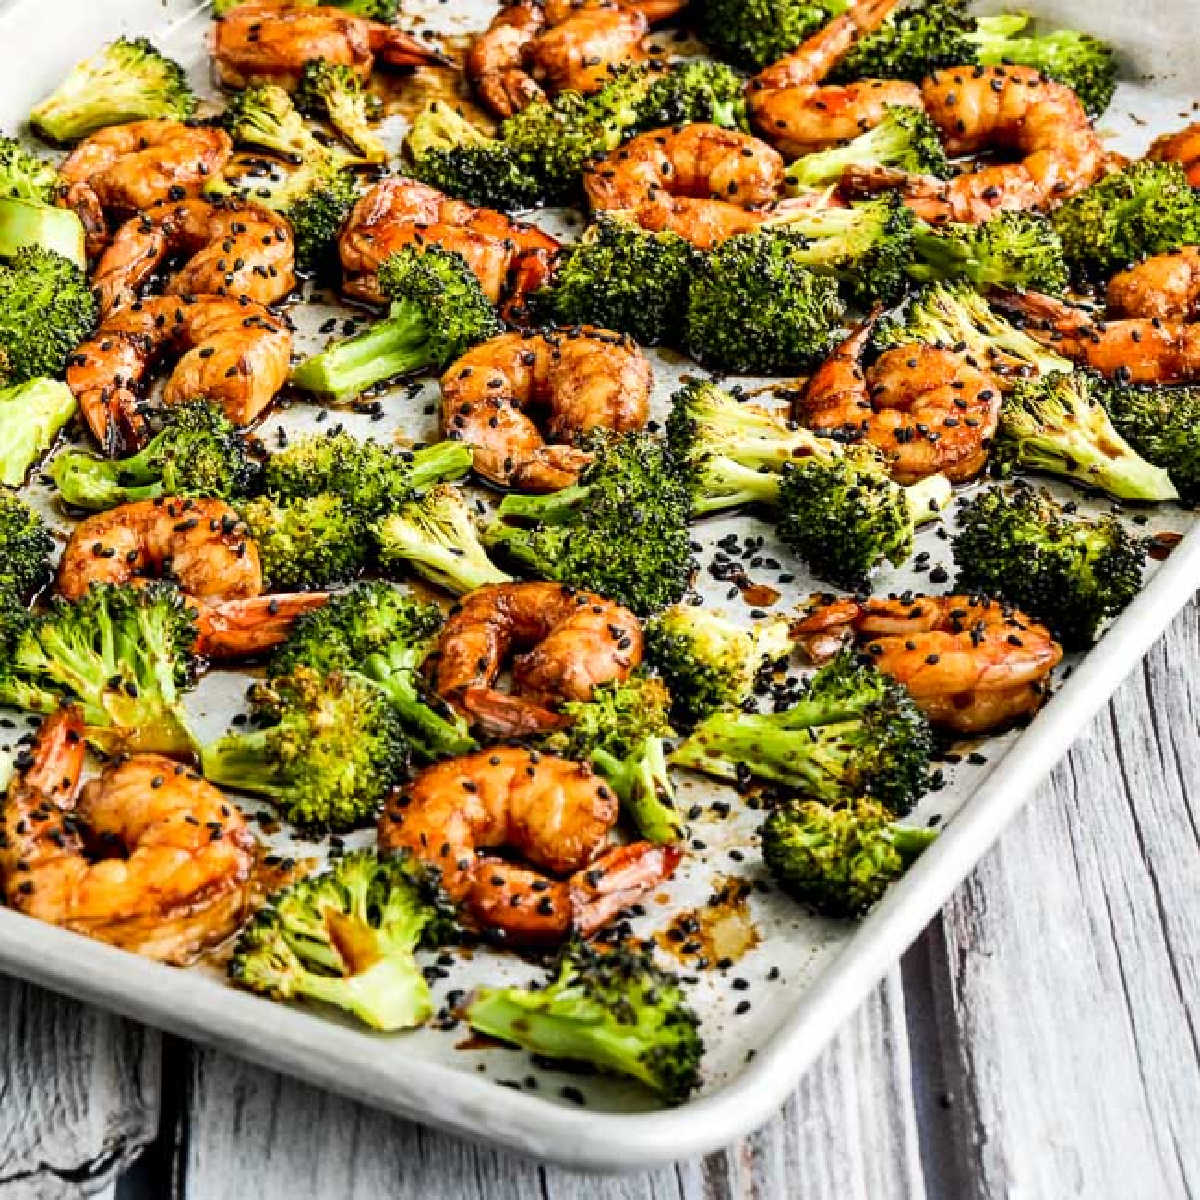 Square image of Shrimp and Broccoli Sheet Pan Meal shown on baking sheet.